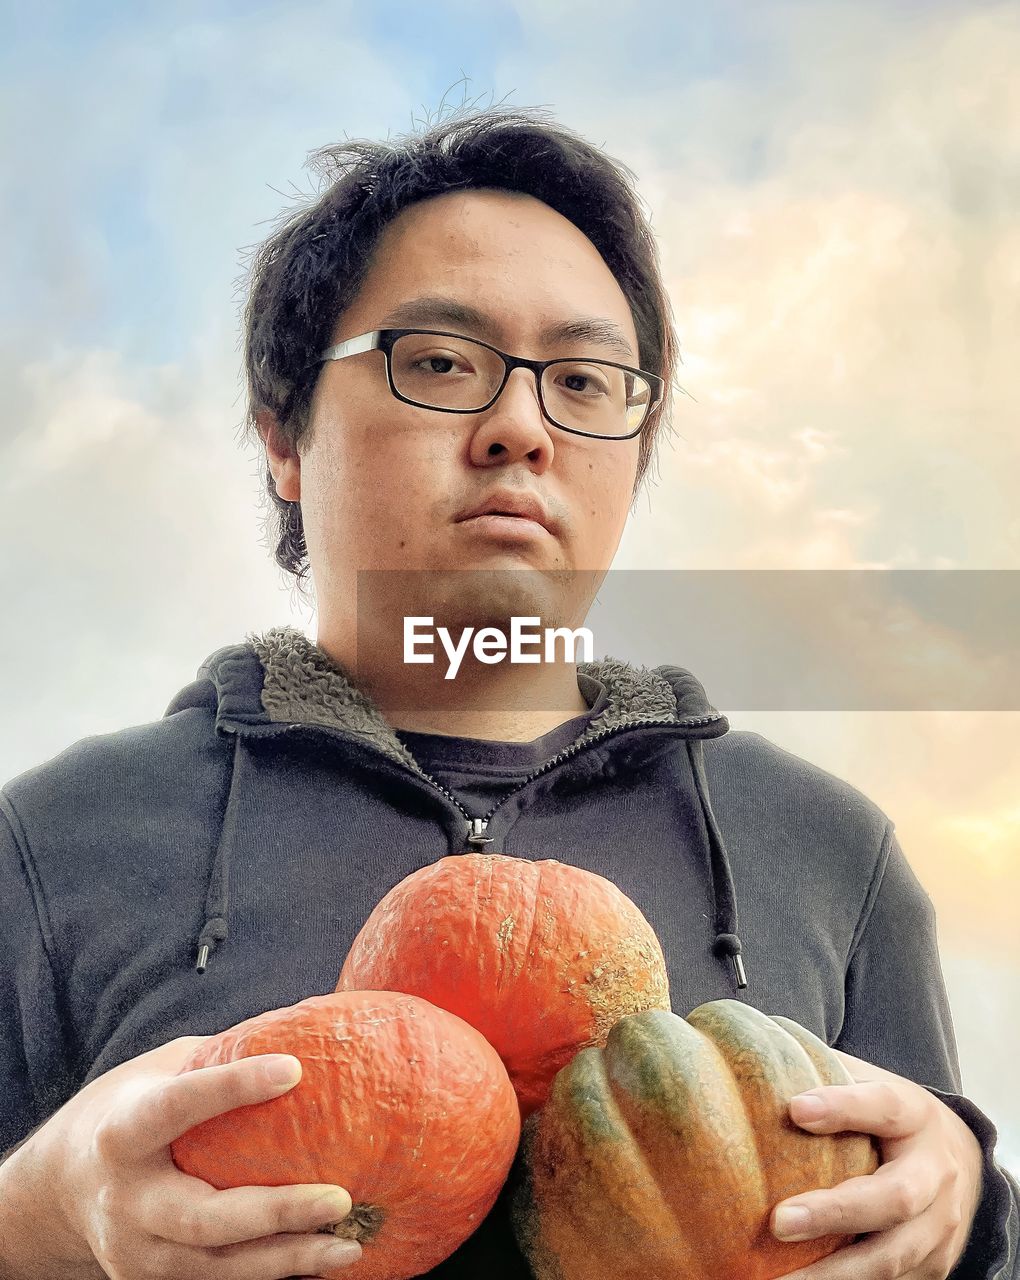 Portrait of young man holding three pumpkins against cloudy sunset sky.